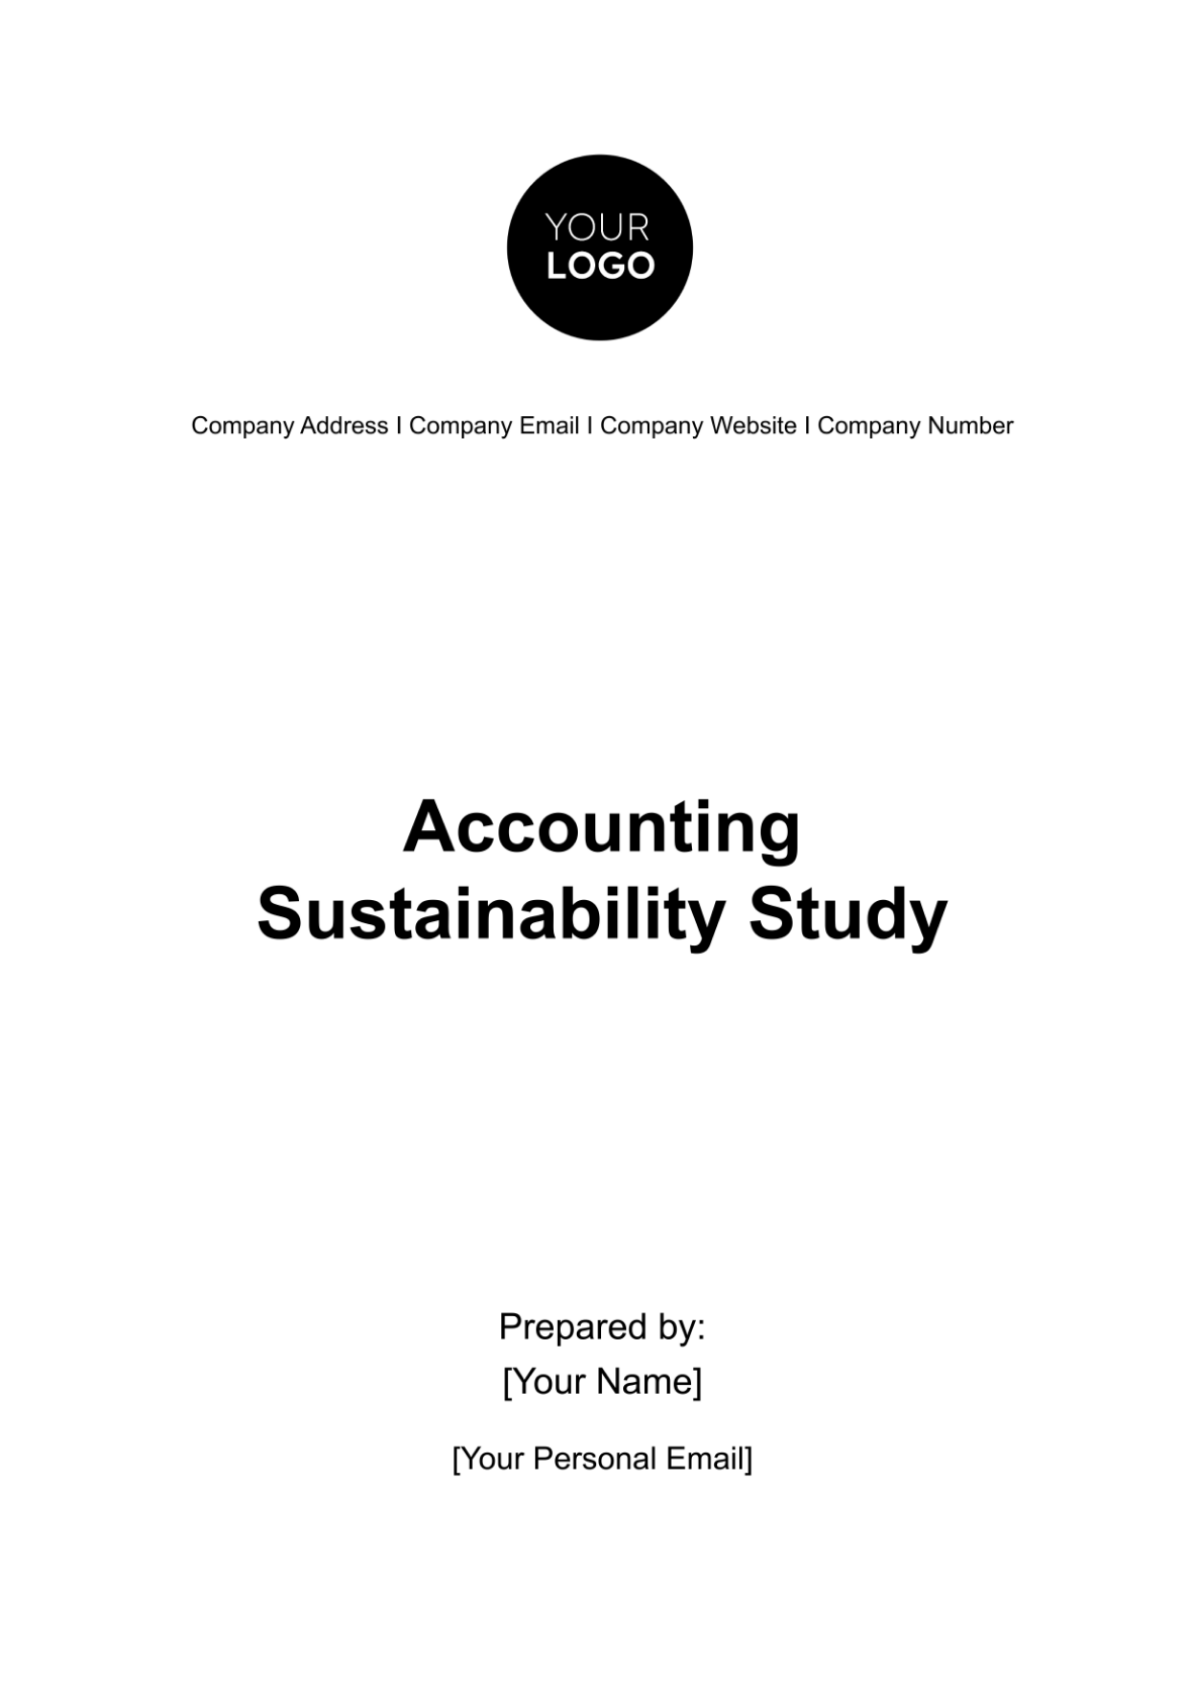 Accounting Sustainability Study Template